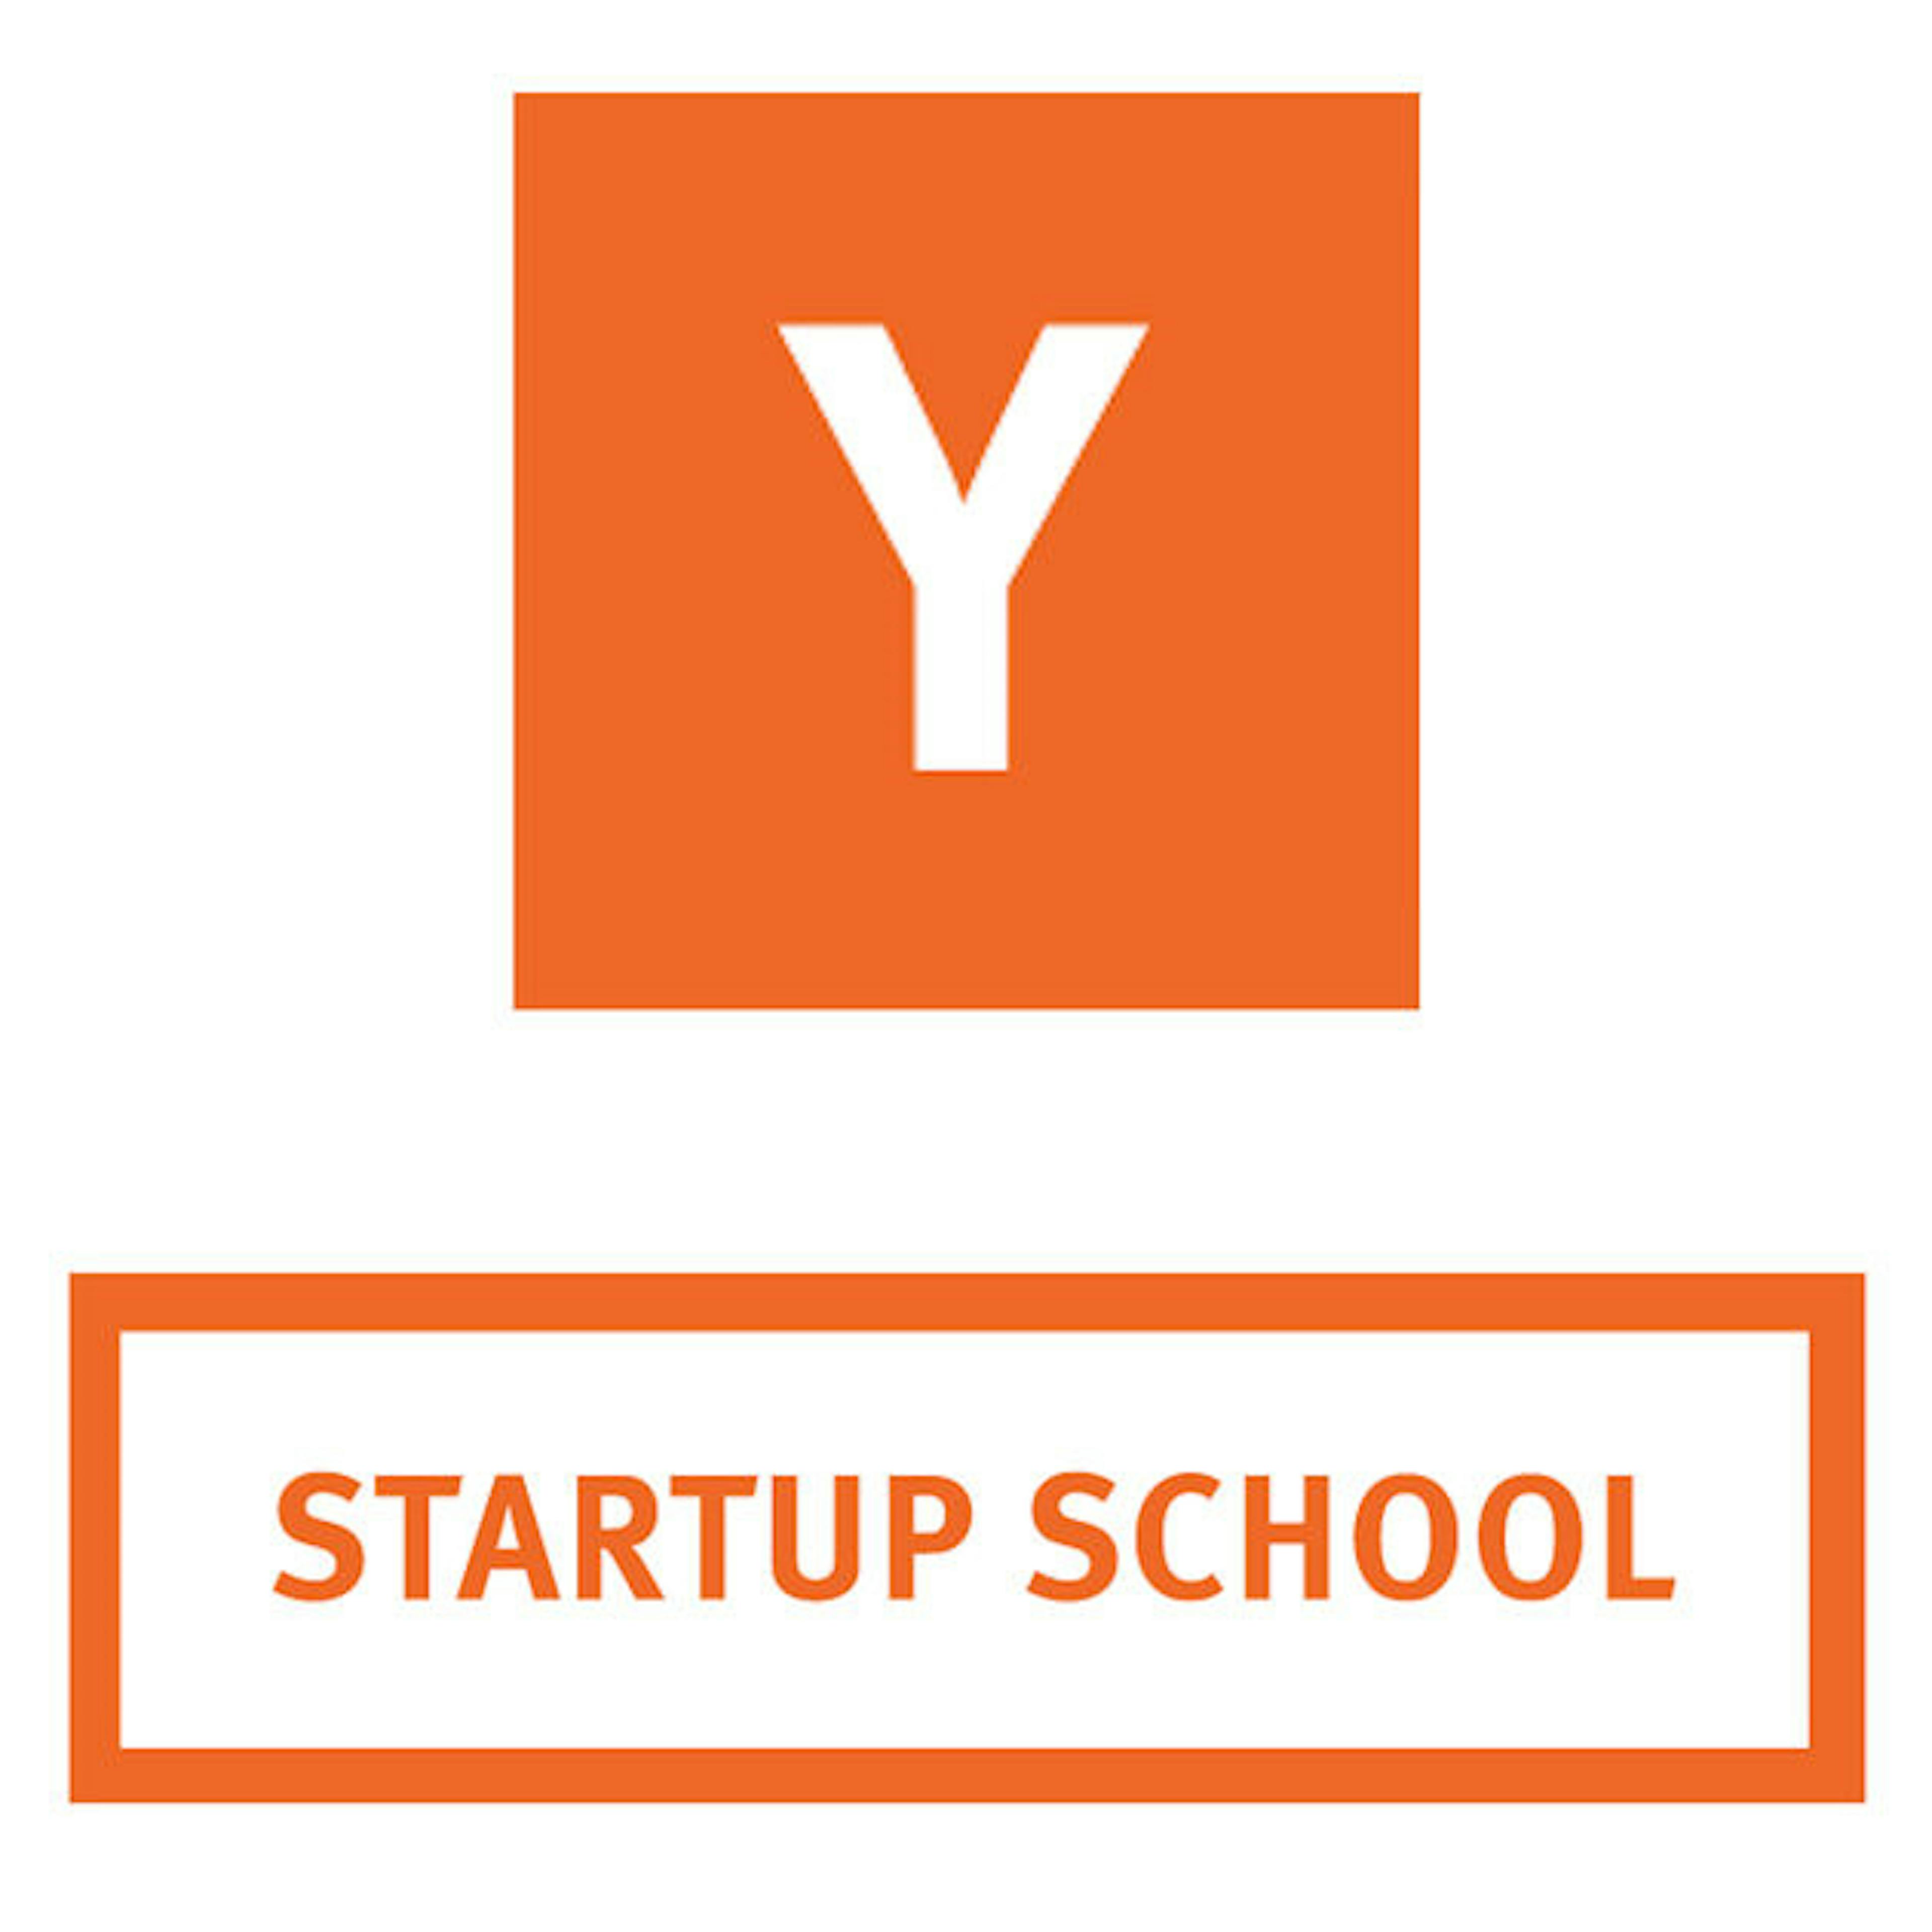 /seven-key-takeaways-from-our-journey-through-y-combinator-startup-school-f4249a2d4f42 feature image